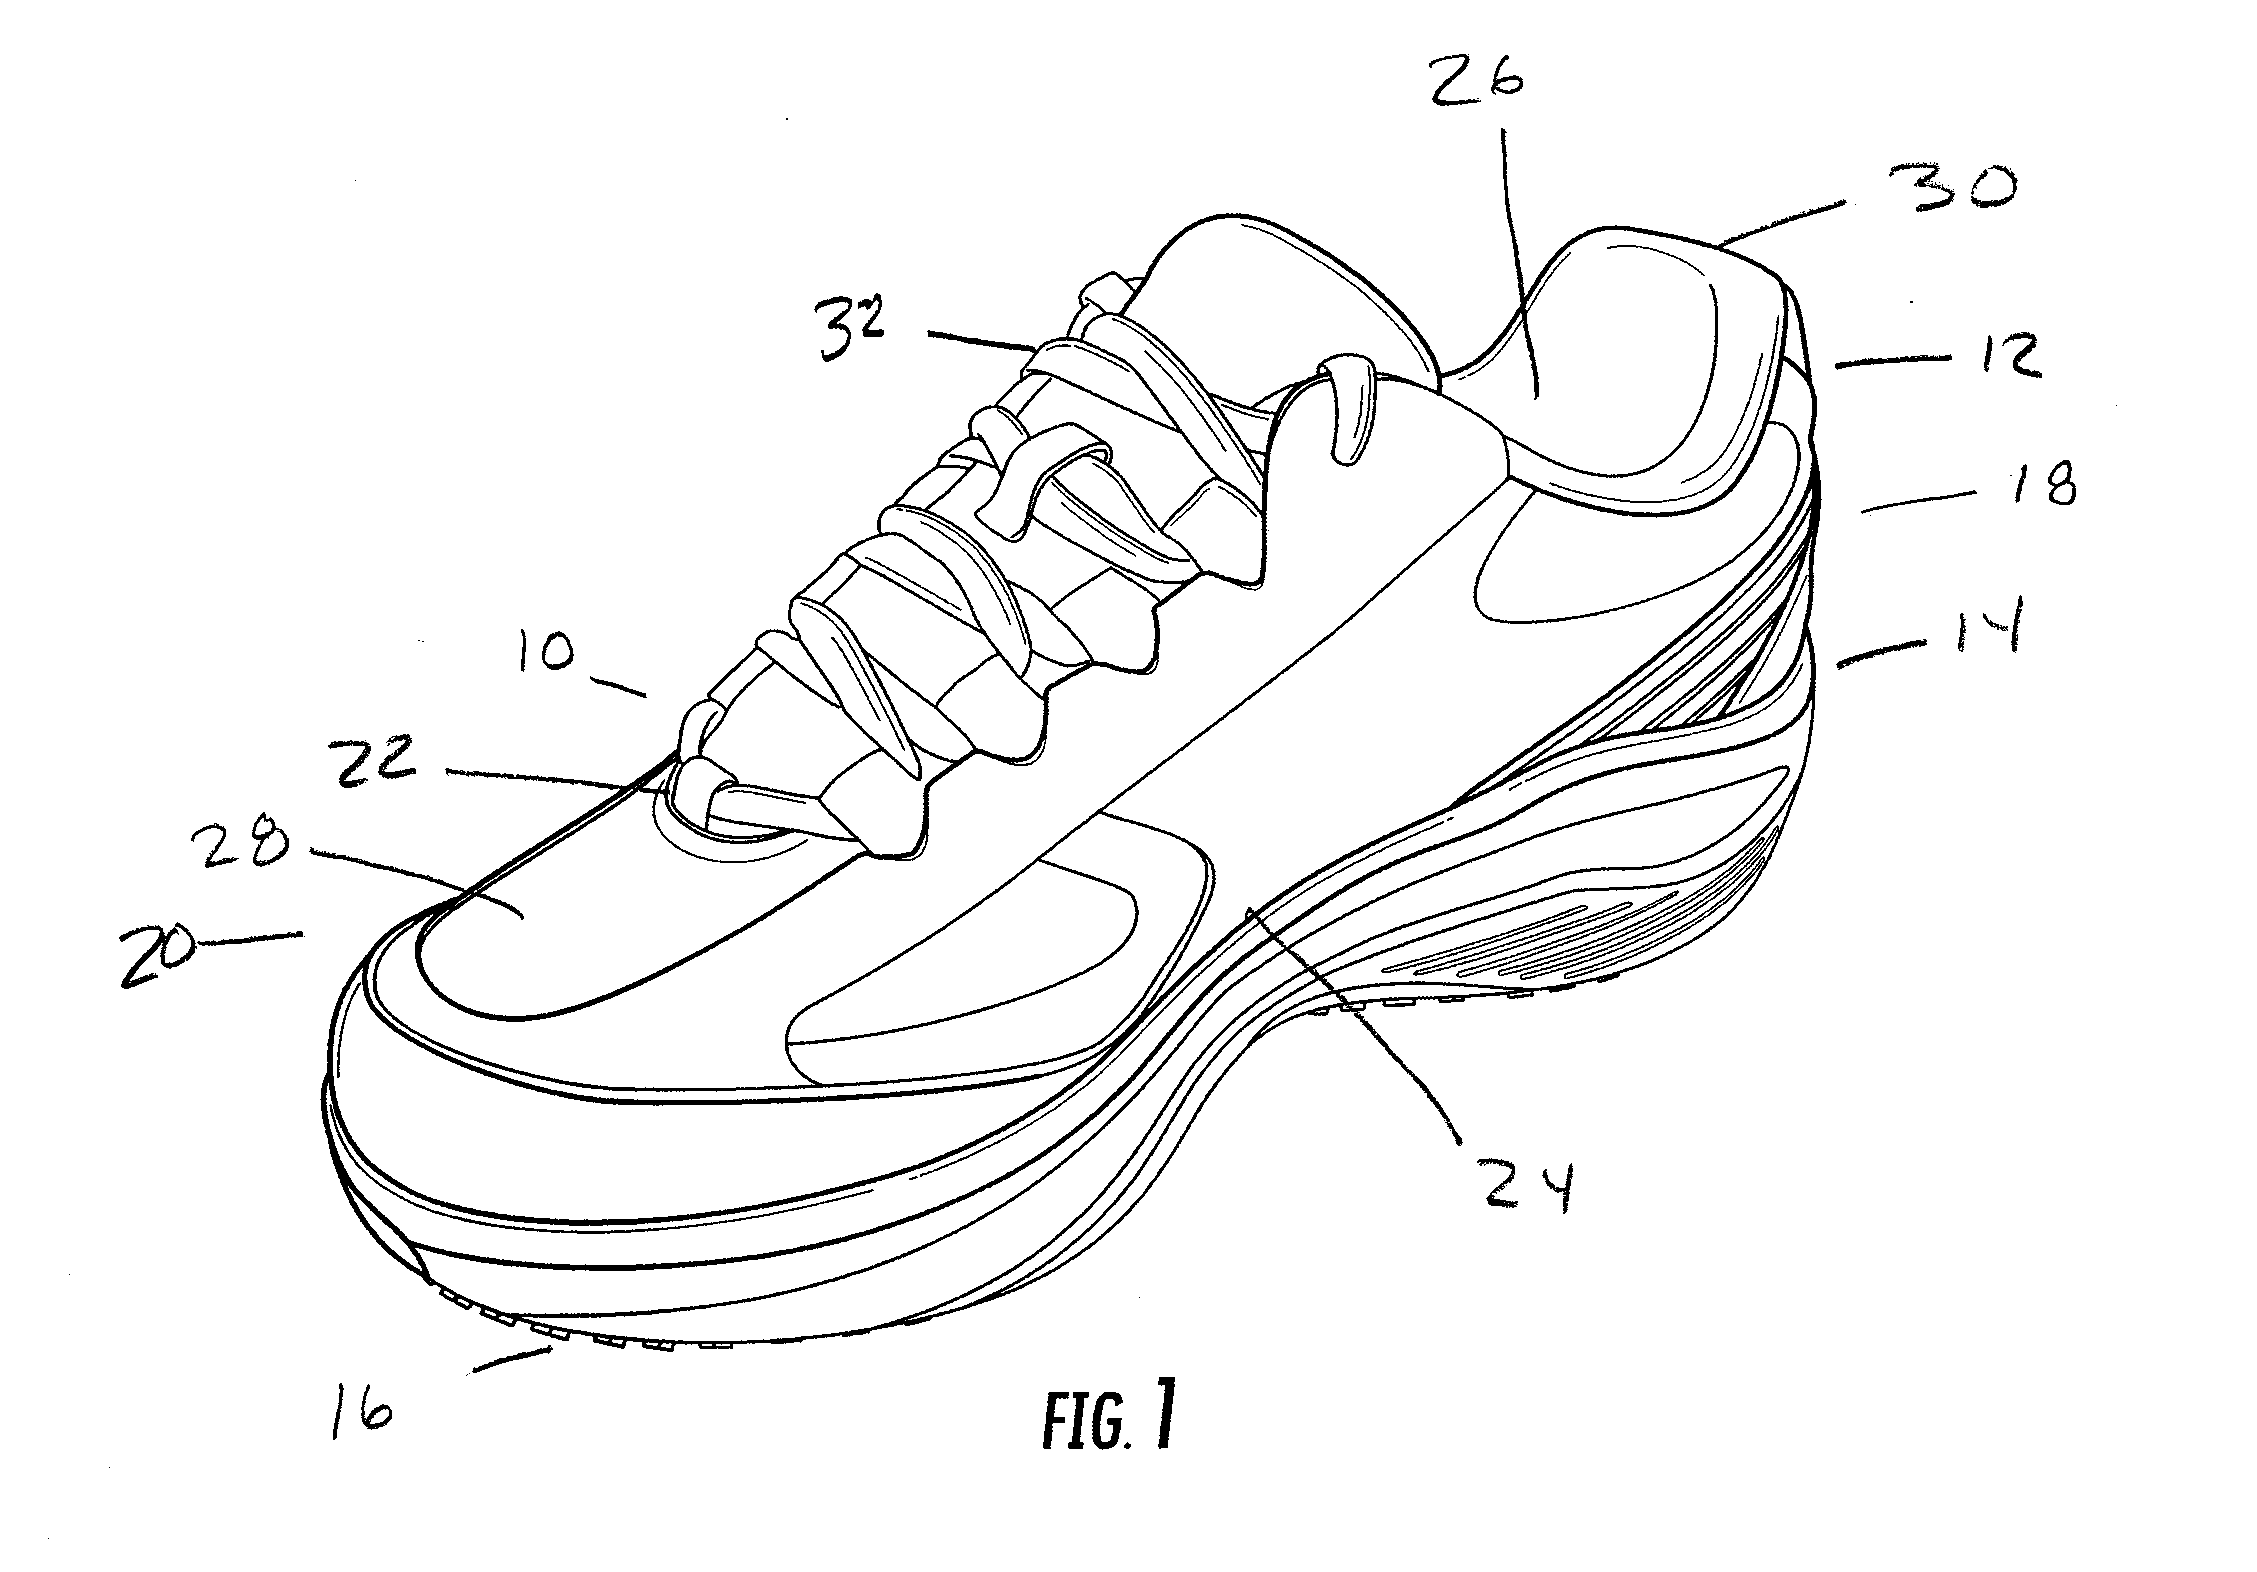 Shoe Construction Having A Rocker Shaped Bottom And Integral Stabilizer